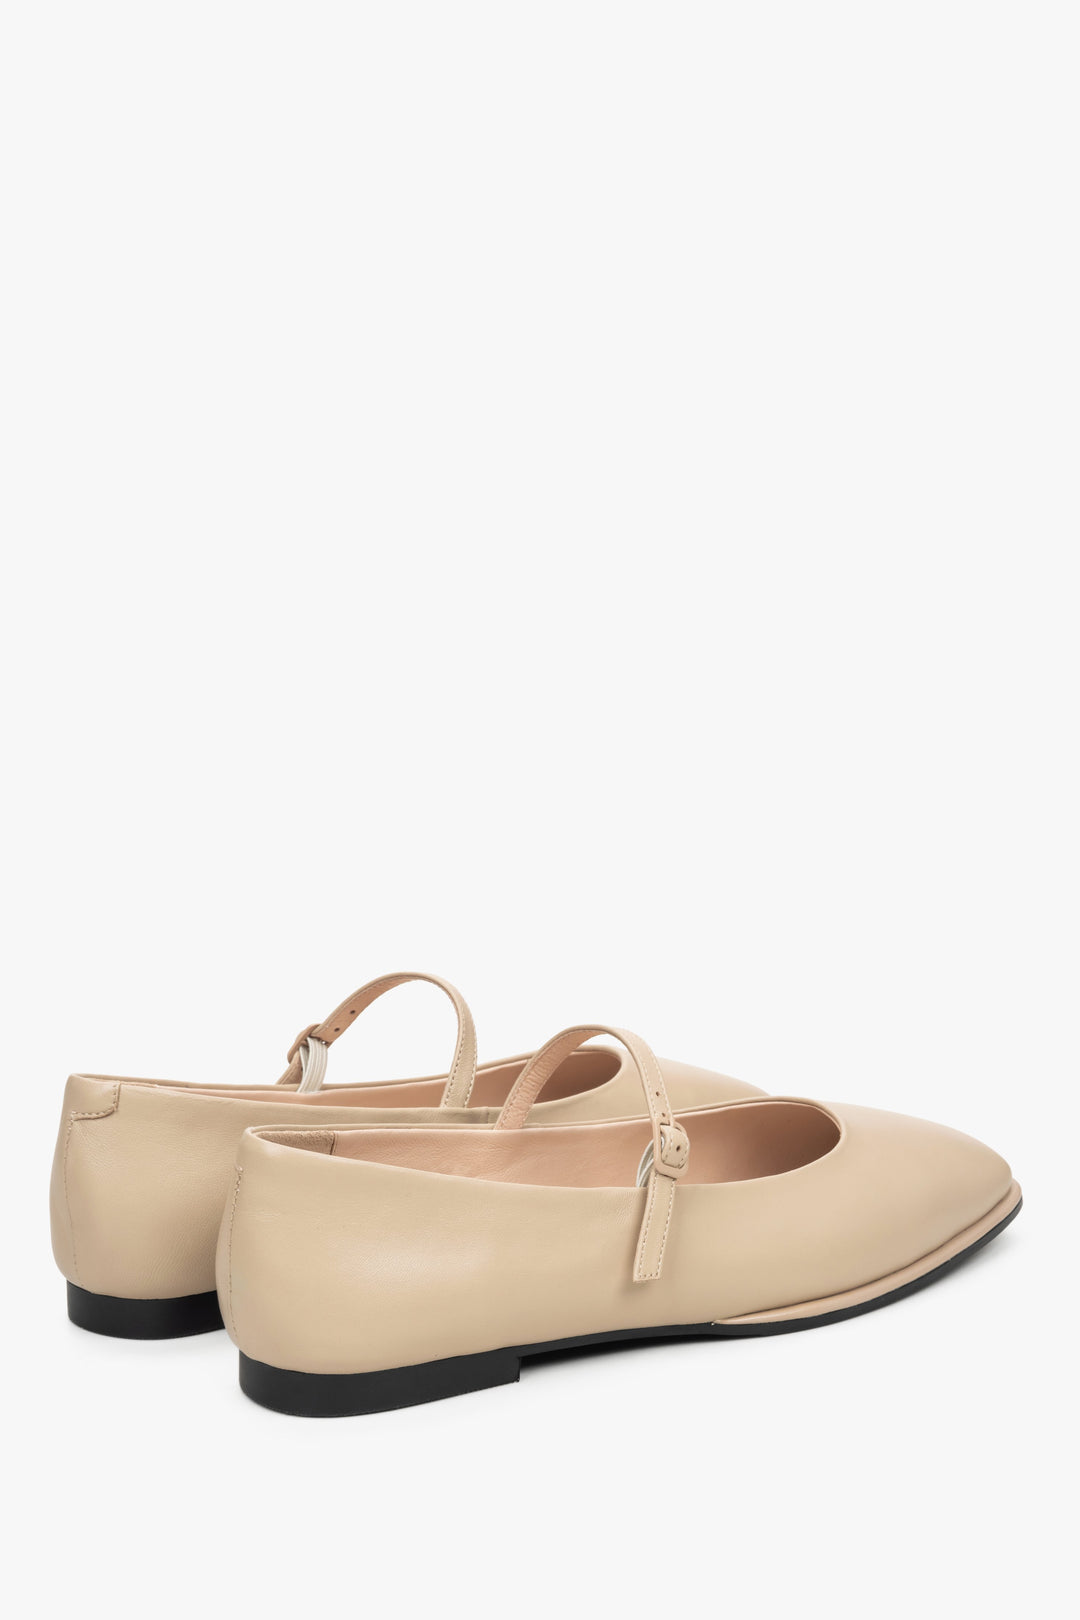 Women's beige leather ballet flats by Estro - close-up on the heel and side line of the shoes.